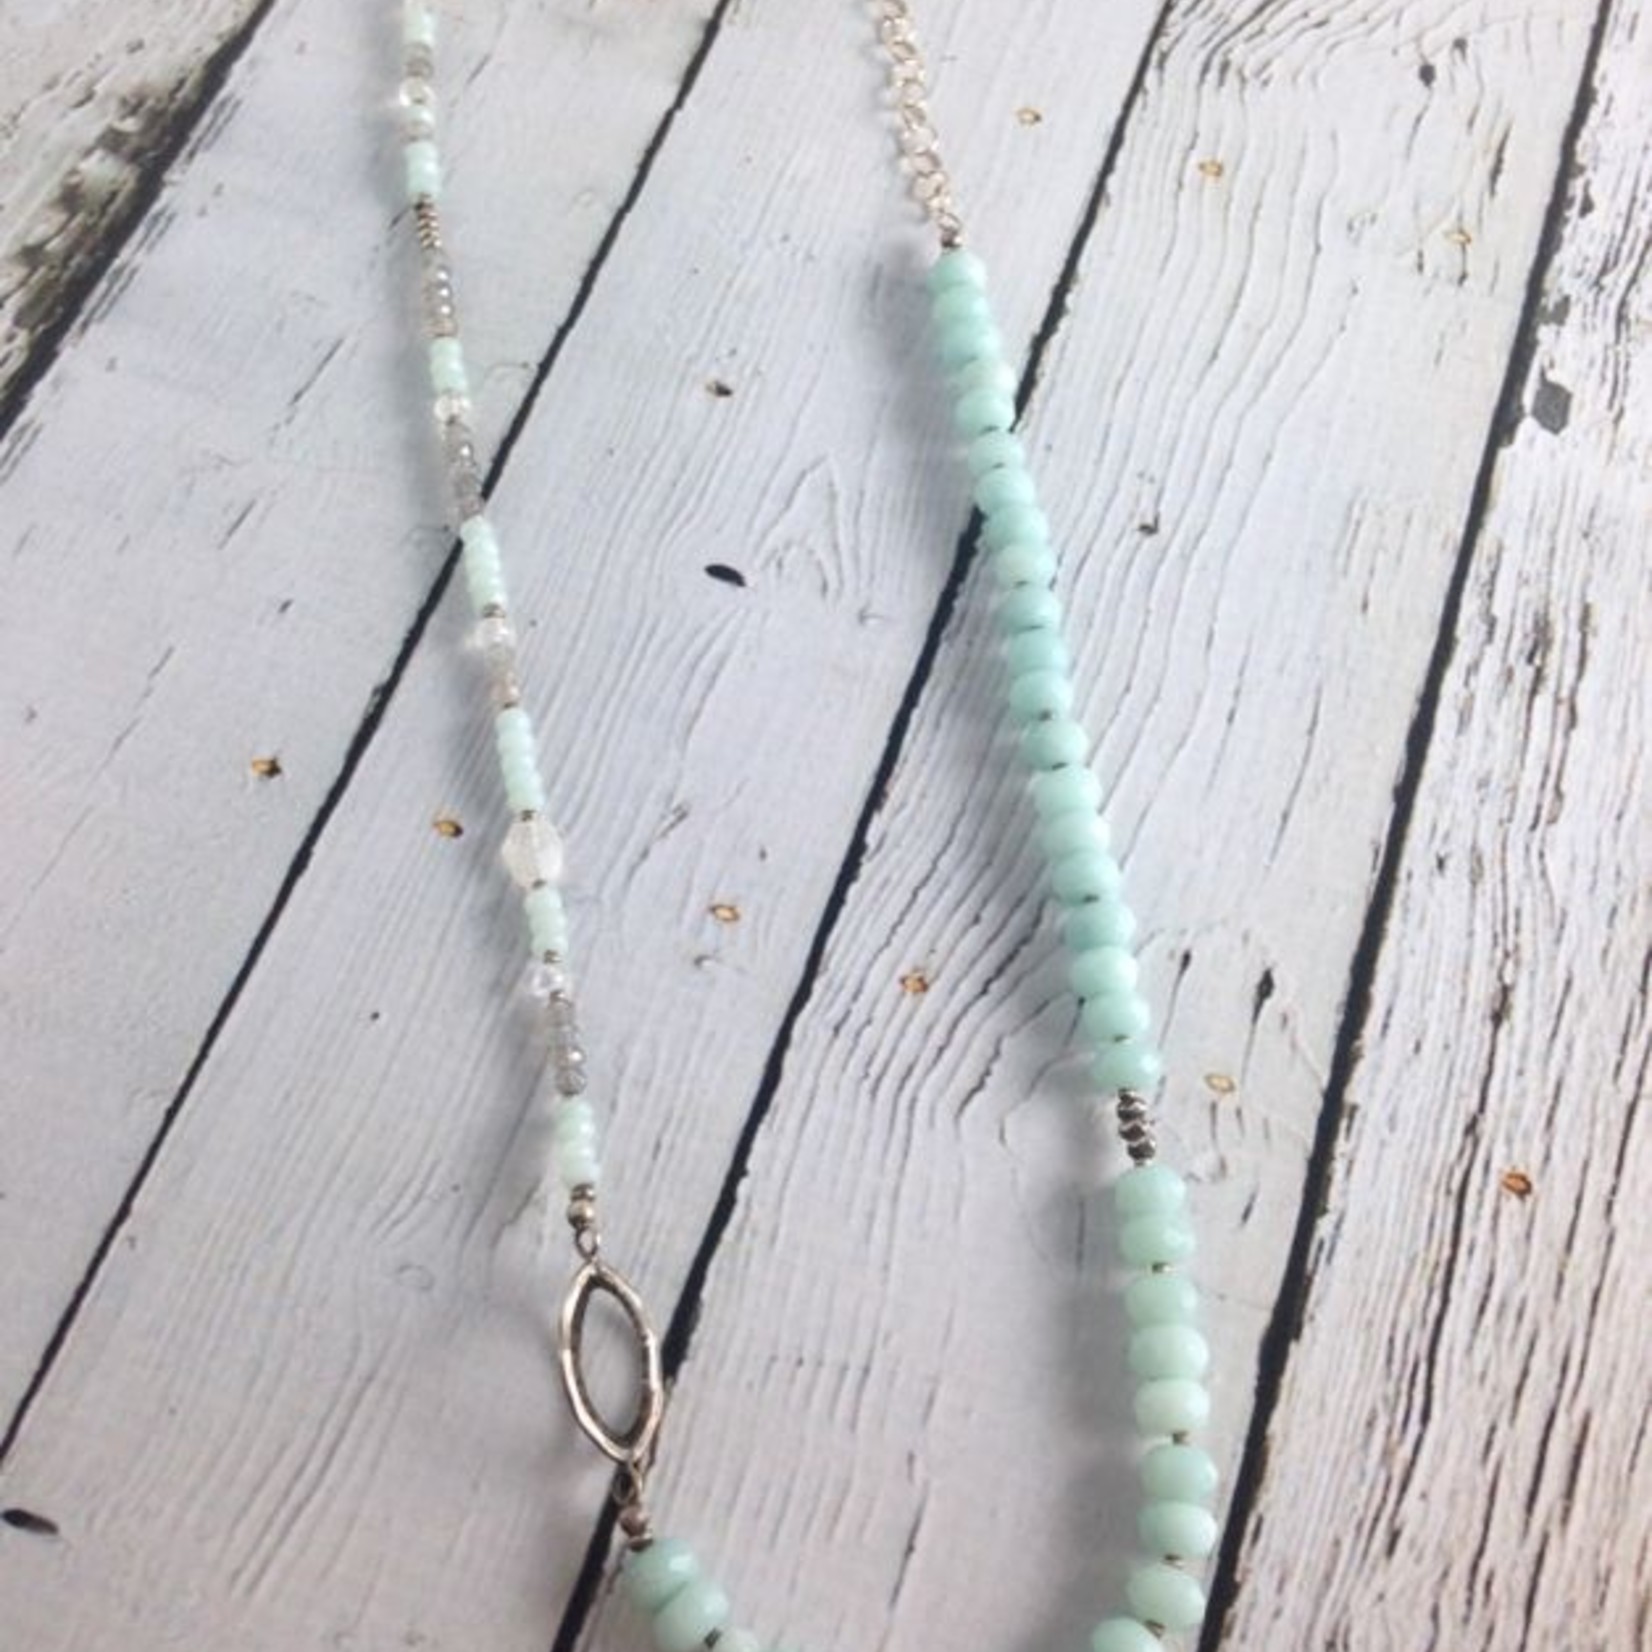 Handmade Sterling Silver, Faceted Amazonite, Labradorite and Moonstone Necklace, 20”